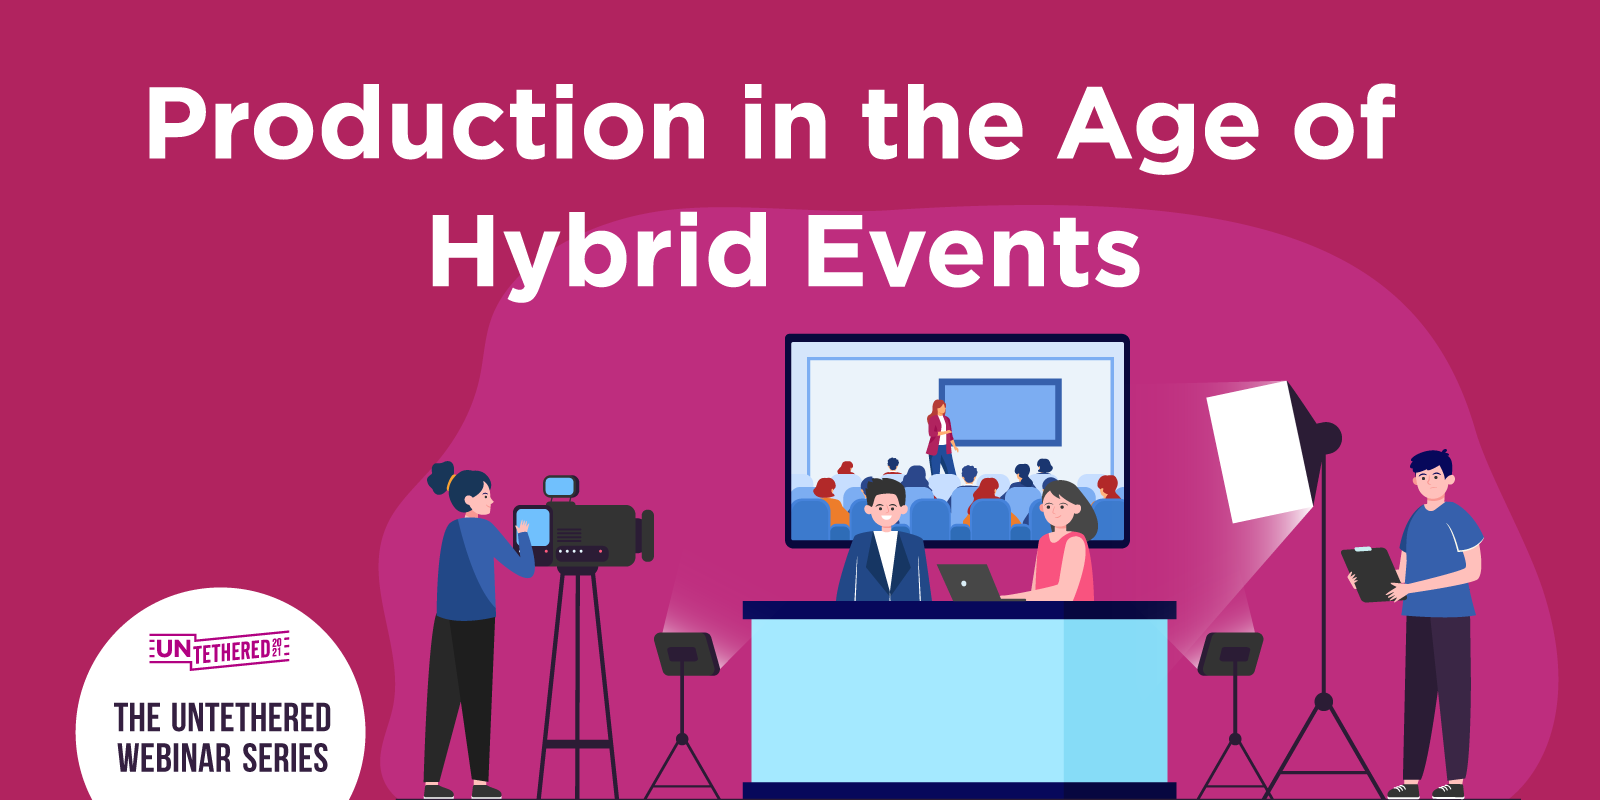 Production in the Age of Hybrid Events Webinar